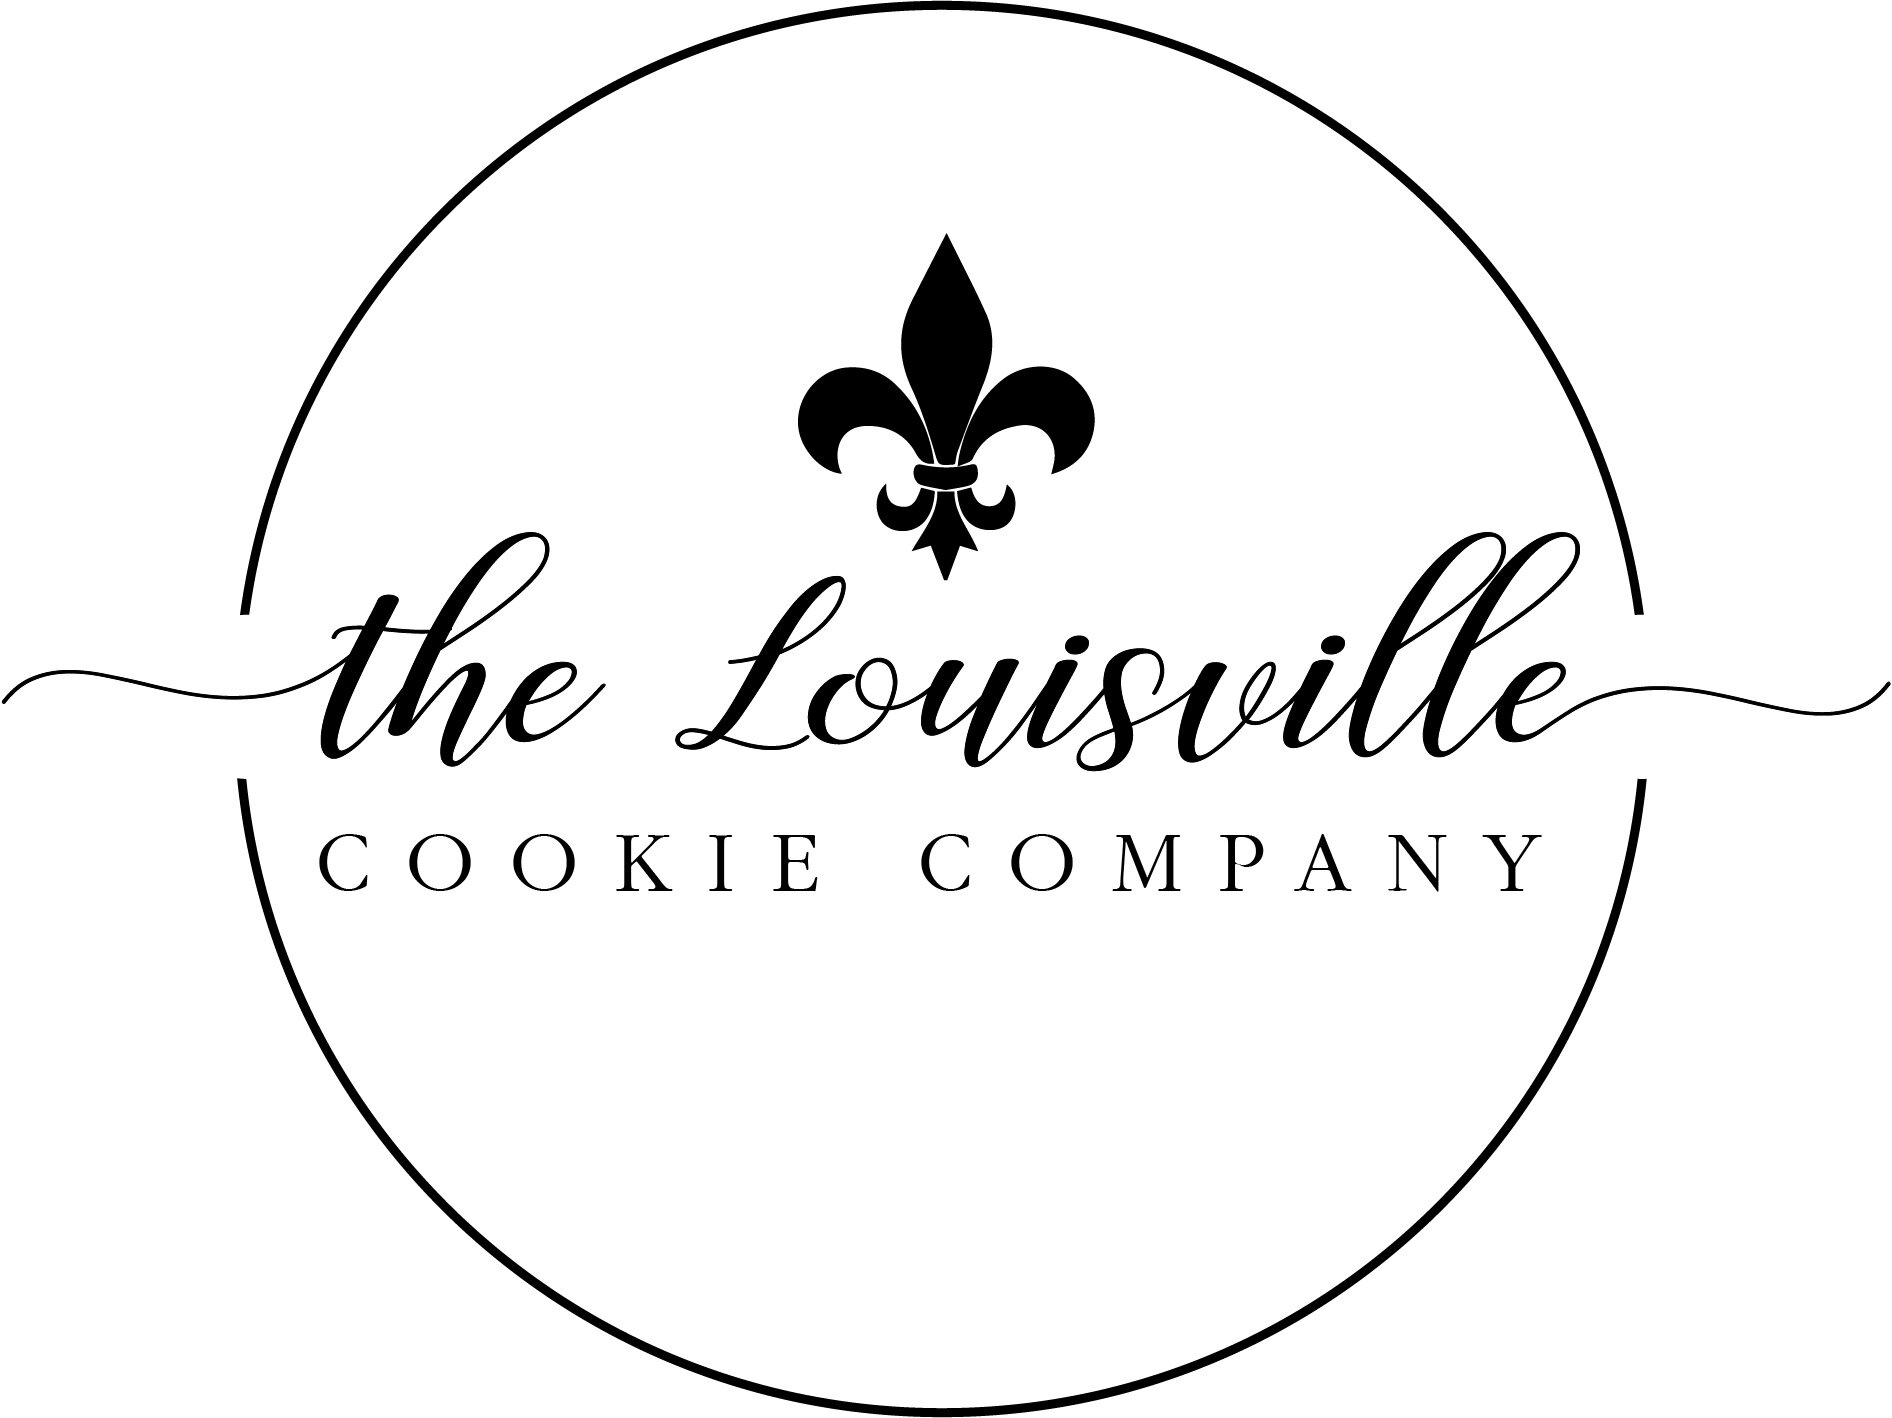 The Louisville Cookie Company